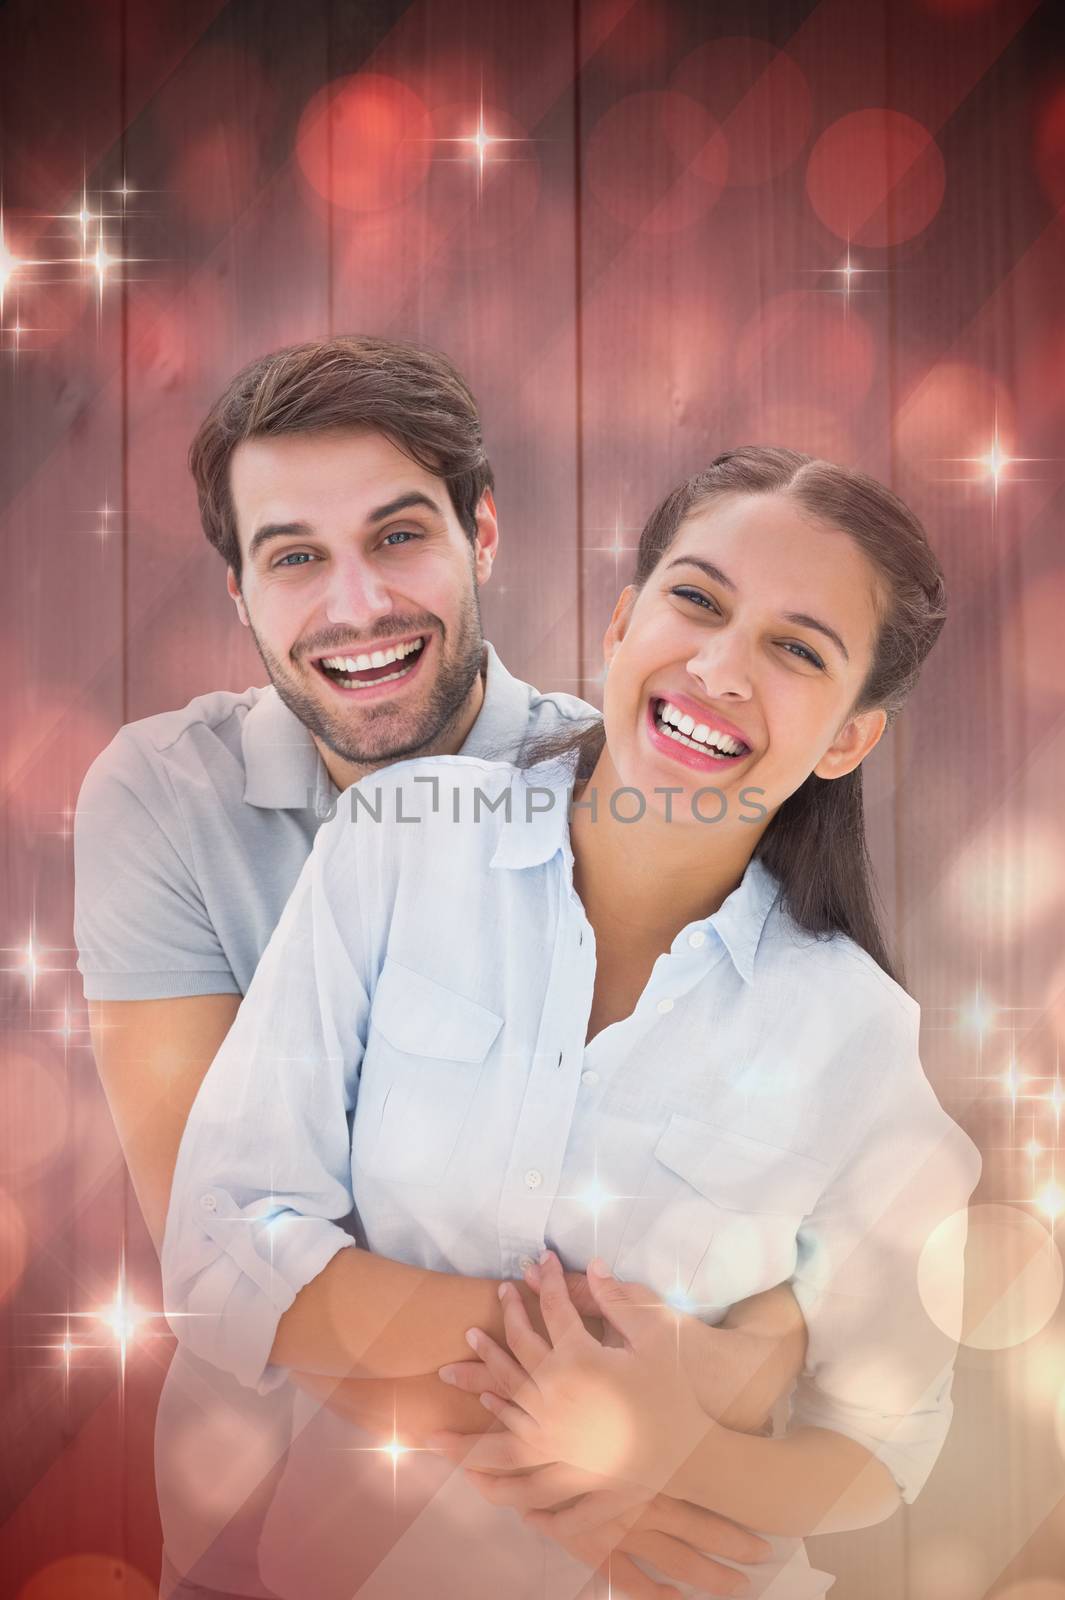 Cute couple hugging and smiling at camera against light design shimmering on red